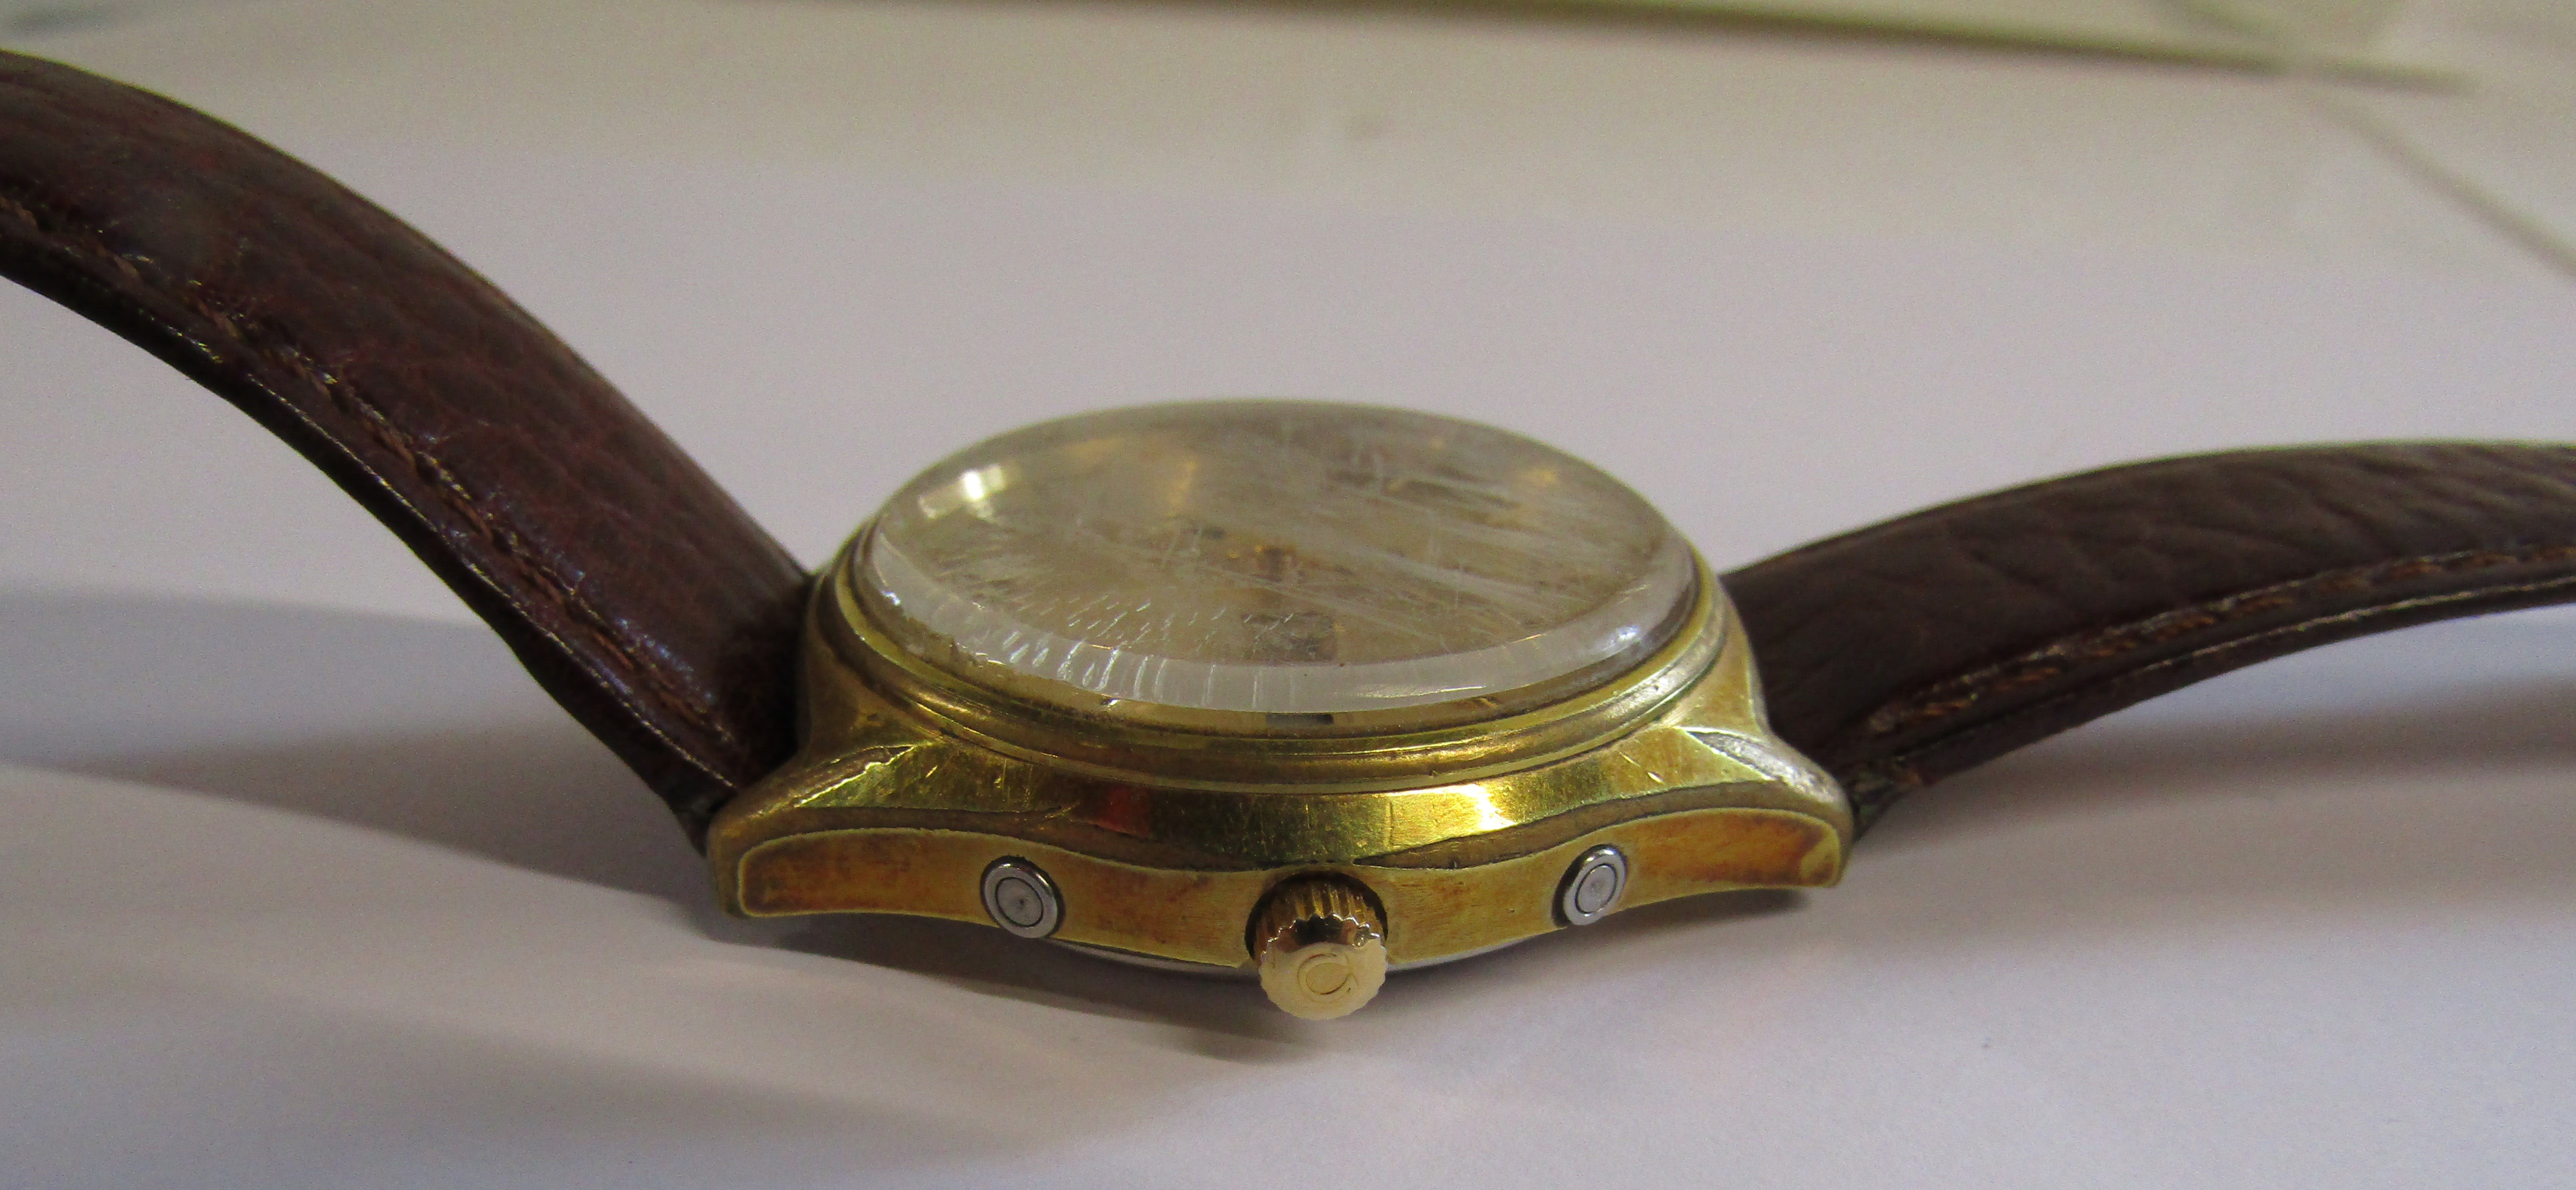 Omega Gold Plated Wristwatch - Image 3 of 5